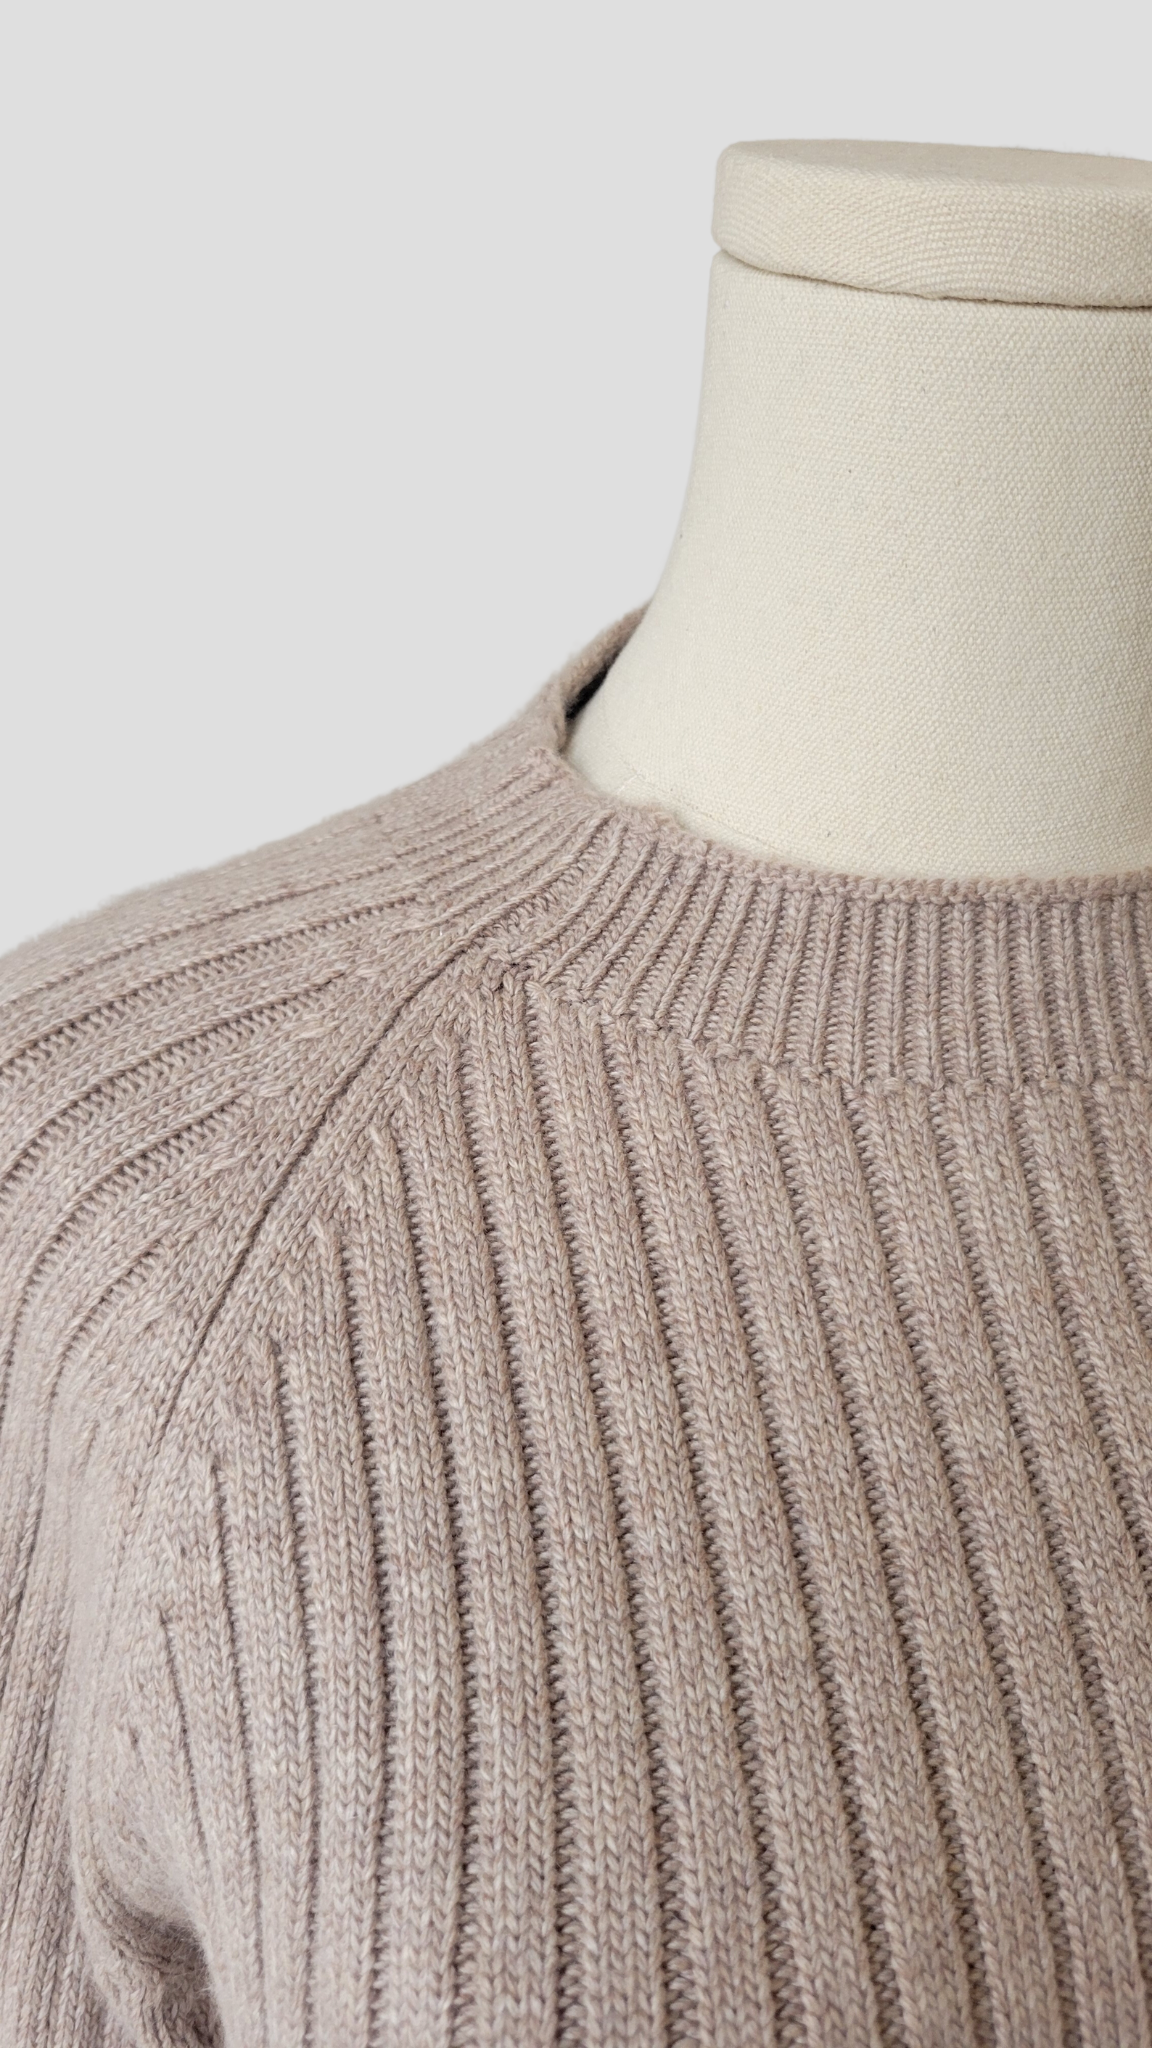 A chic two-piece knit co-ord set in 'Wheat', a beige colour. The set includes a comfy sweater with a relaxed fit and matching knit pants. Perfect for a stylish and cozy look.